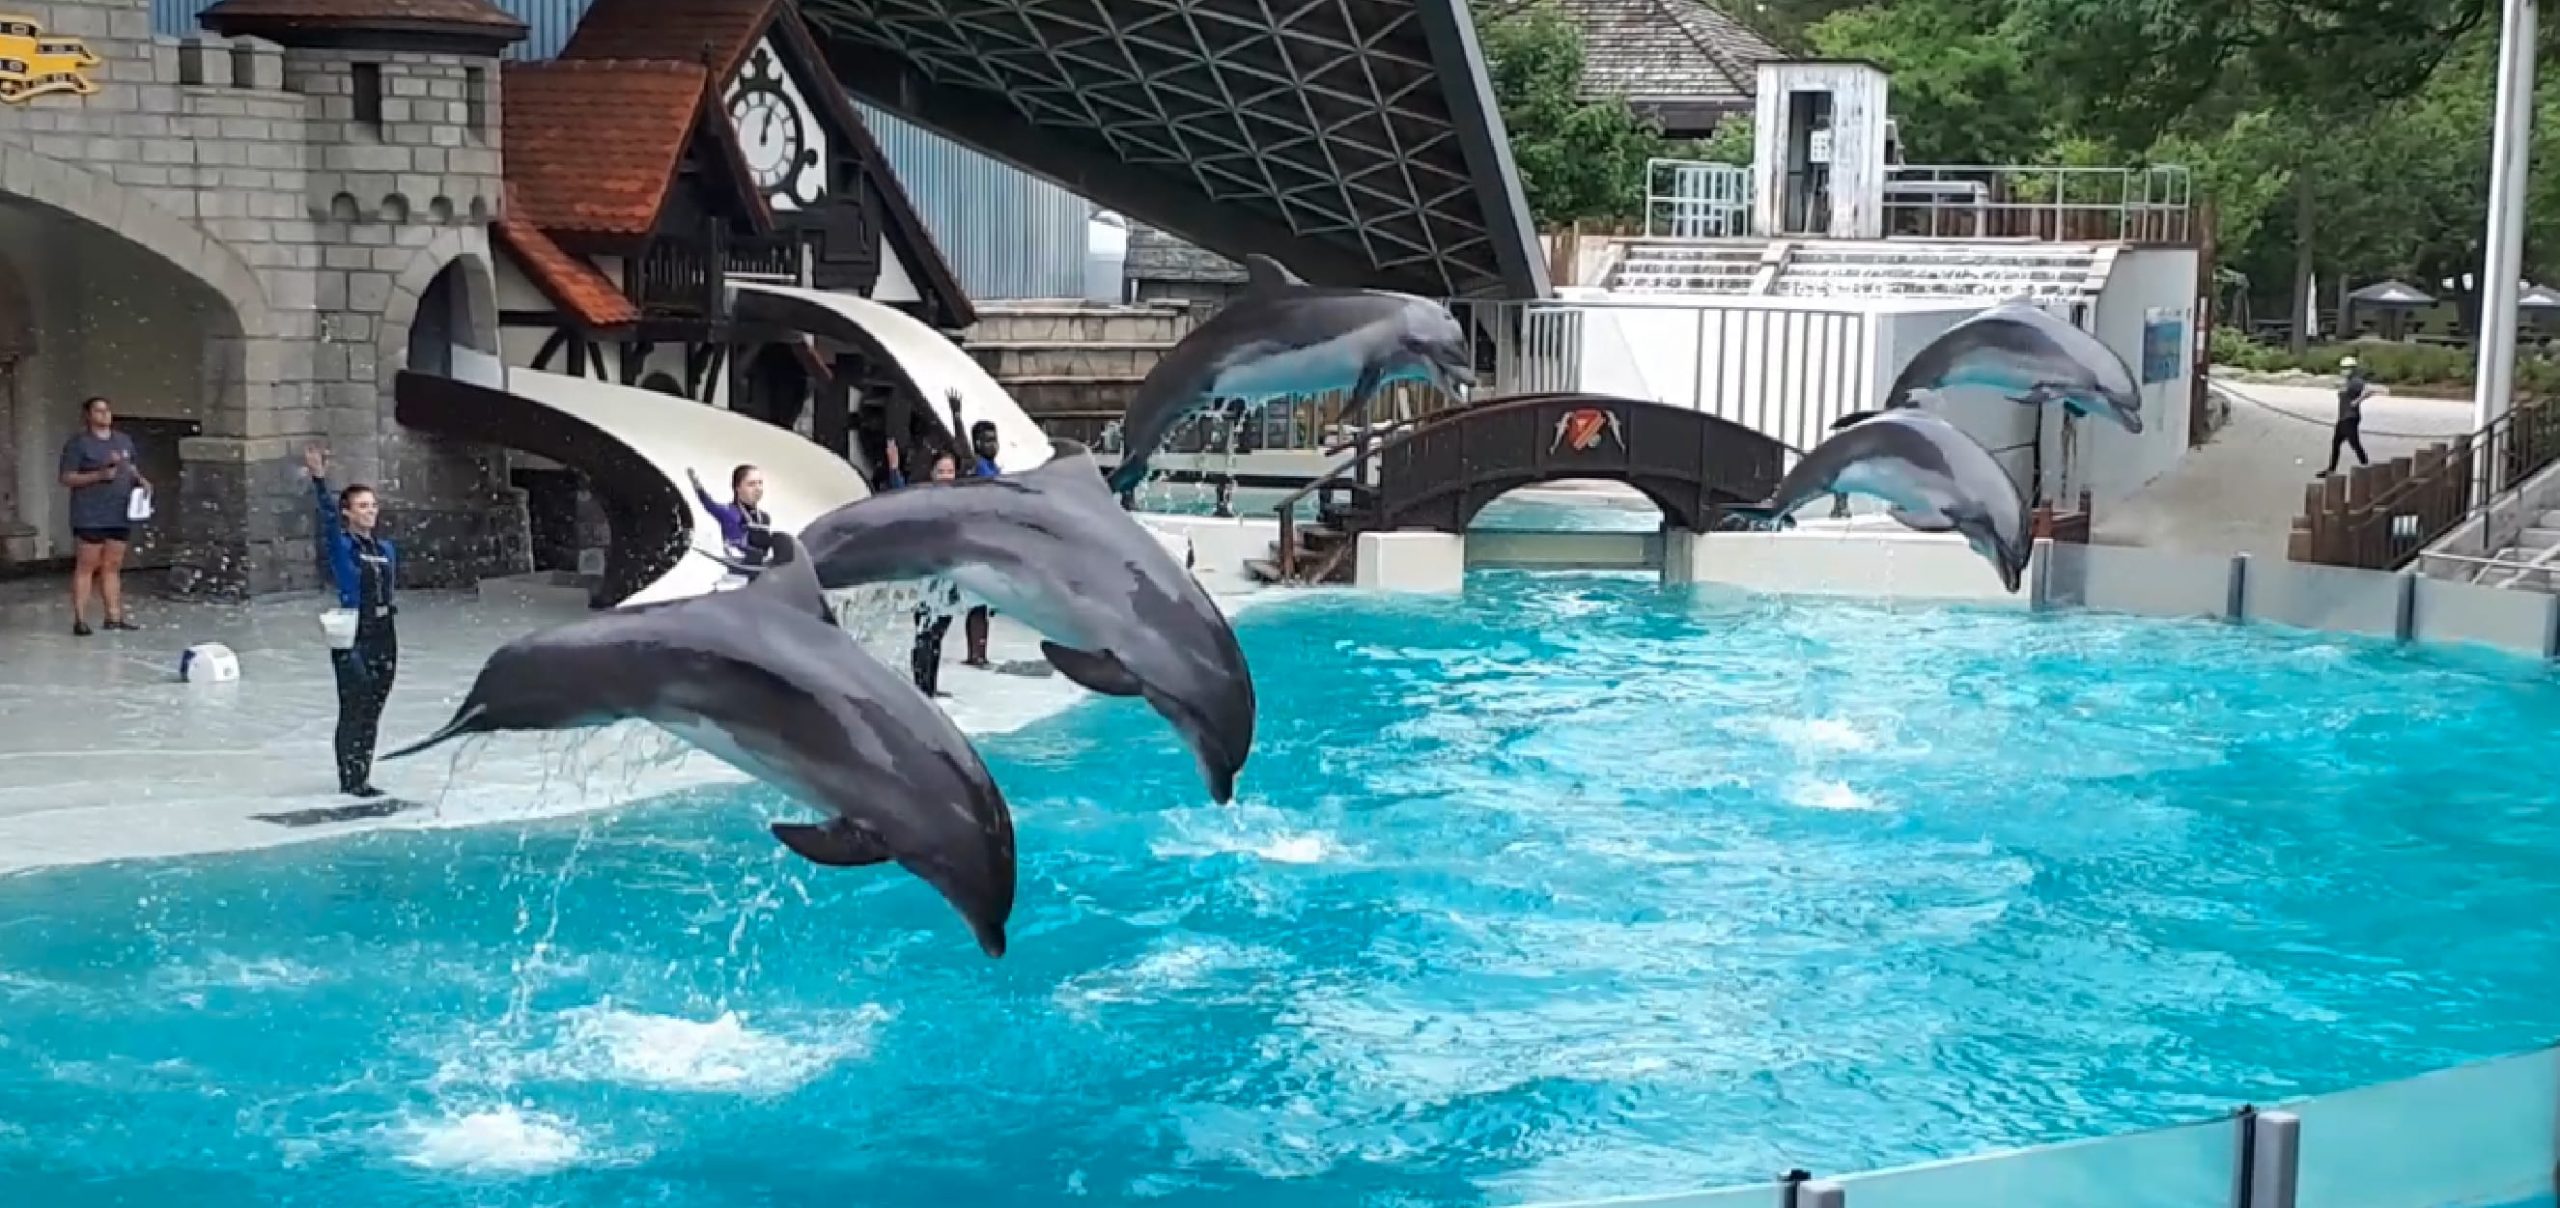 Whales and Dolphins Are STILL Suffering at Marineland